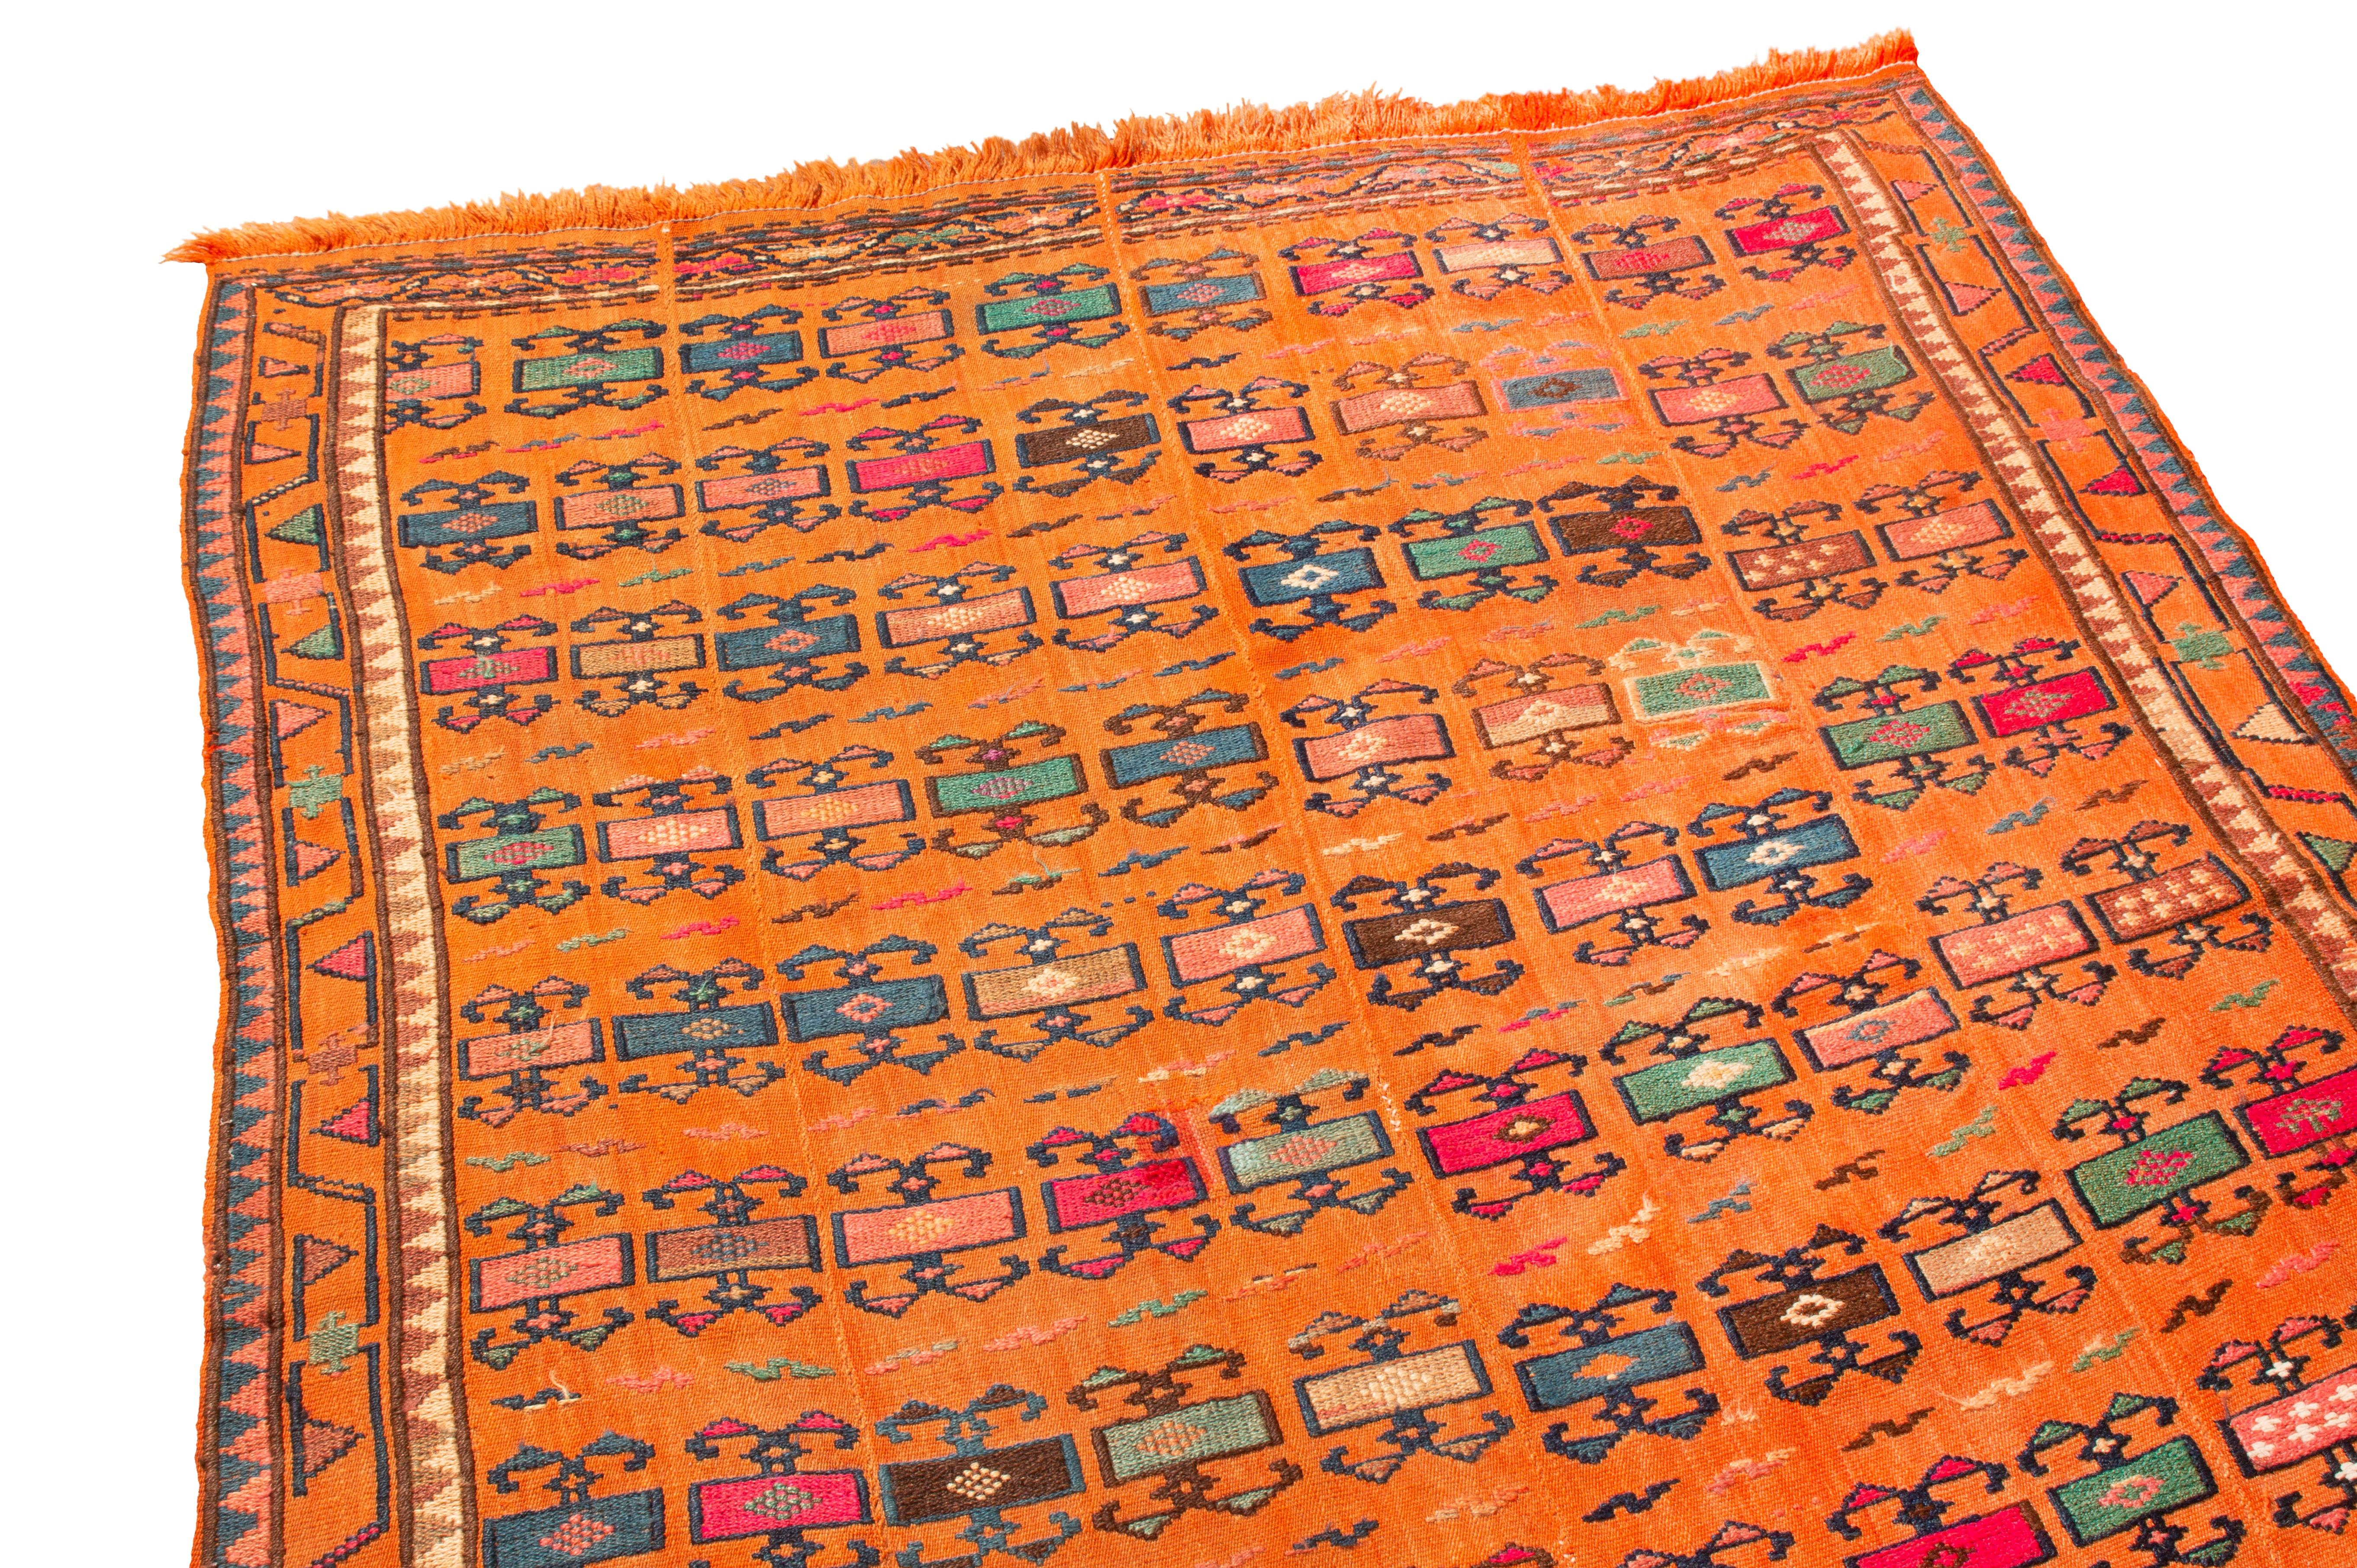 Originating from Persian in 1900, this turn of the century Persian wool kilim rug, a group of antique Cacasian kilims created up to the mid-20thcentury. Verneh antiques were woven with the Soumak style, a tapestry and textile technique weaving